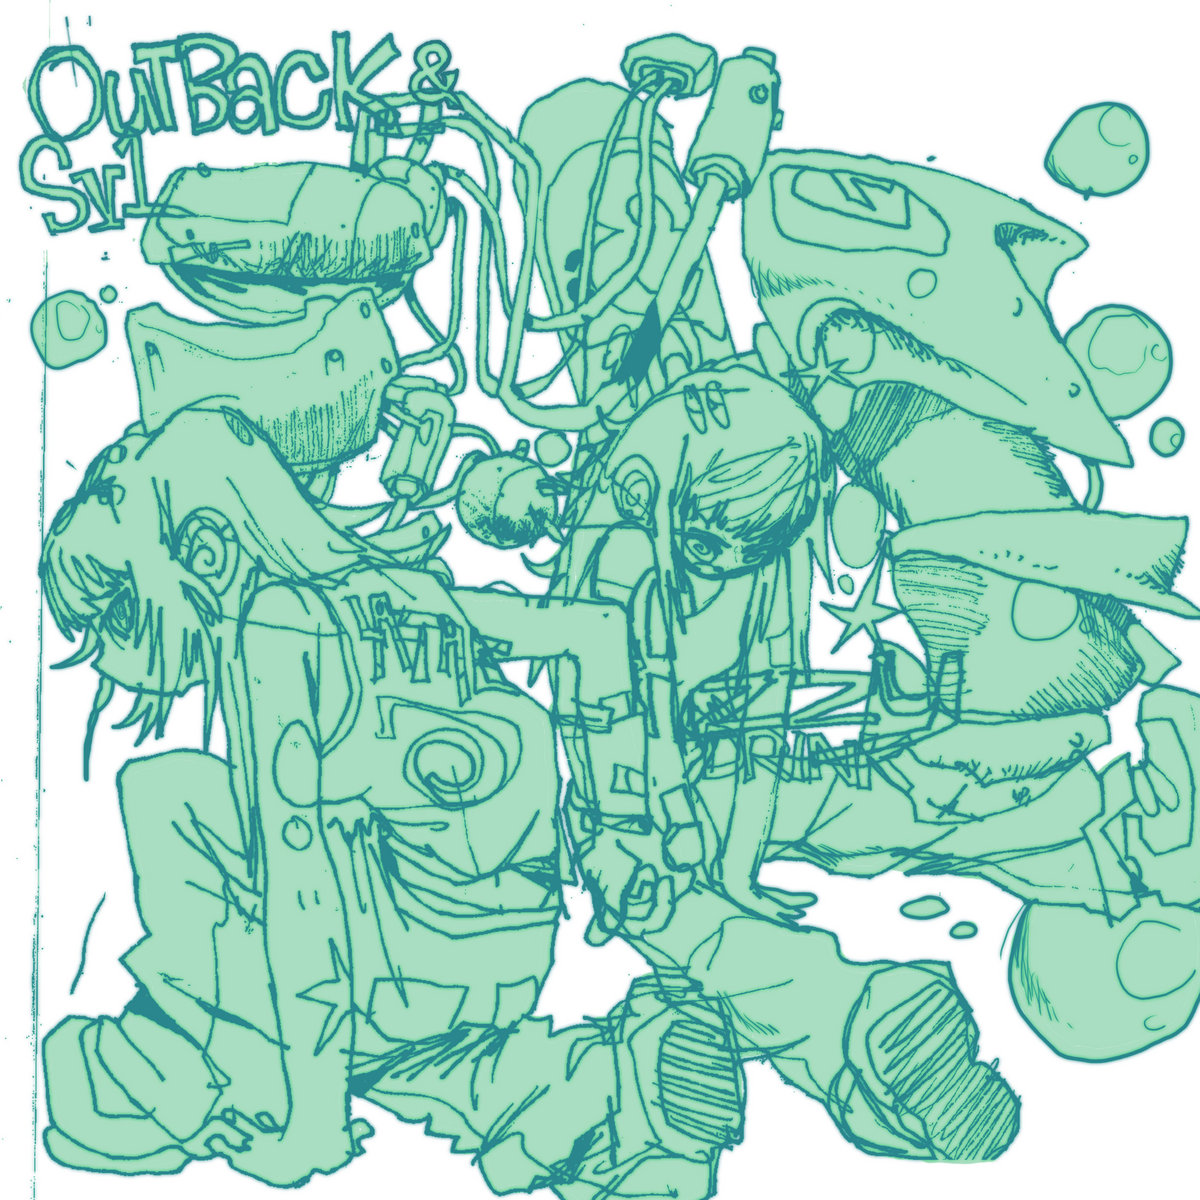 The cover for "Fizzy Drink / Lathe." It consists of overlapping drawings of two girls, unspecified technology, and bubbles. The drawings are all teal on a white background. "Outback & sv1" is in the upper left corner (also in teal), while the track names are overlapping the two girls.